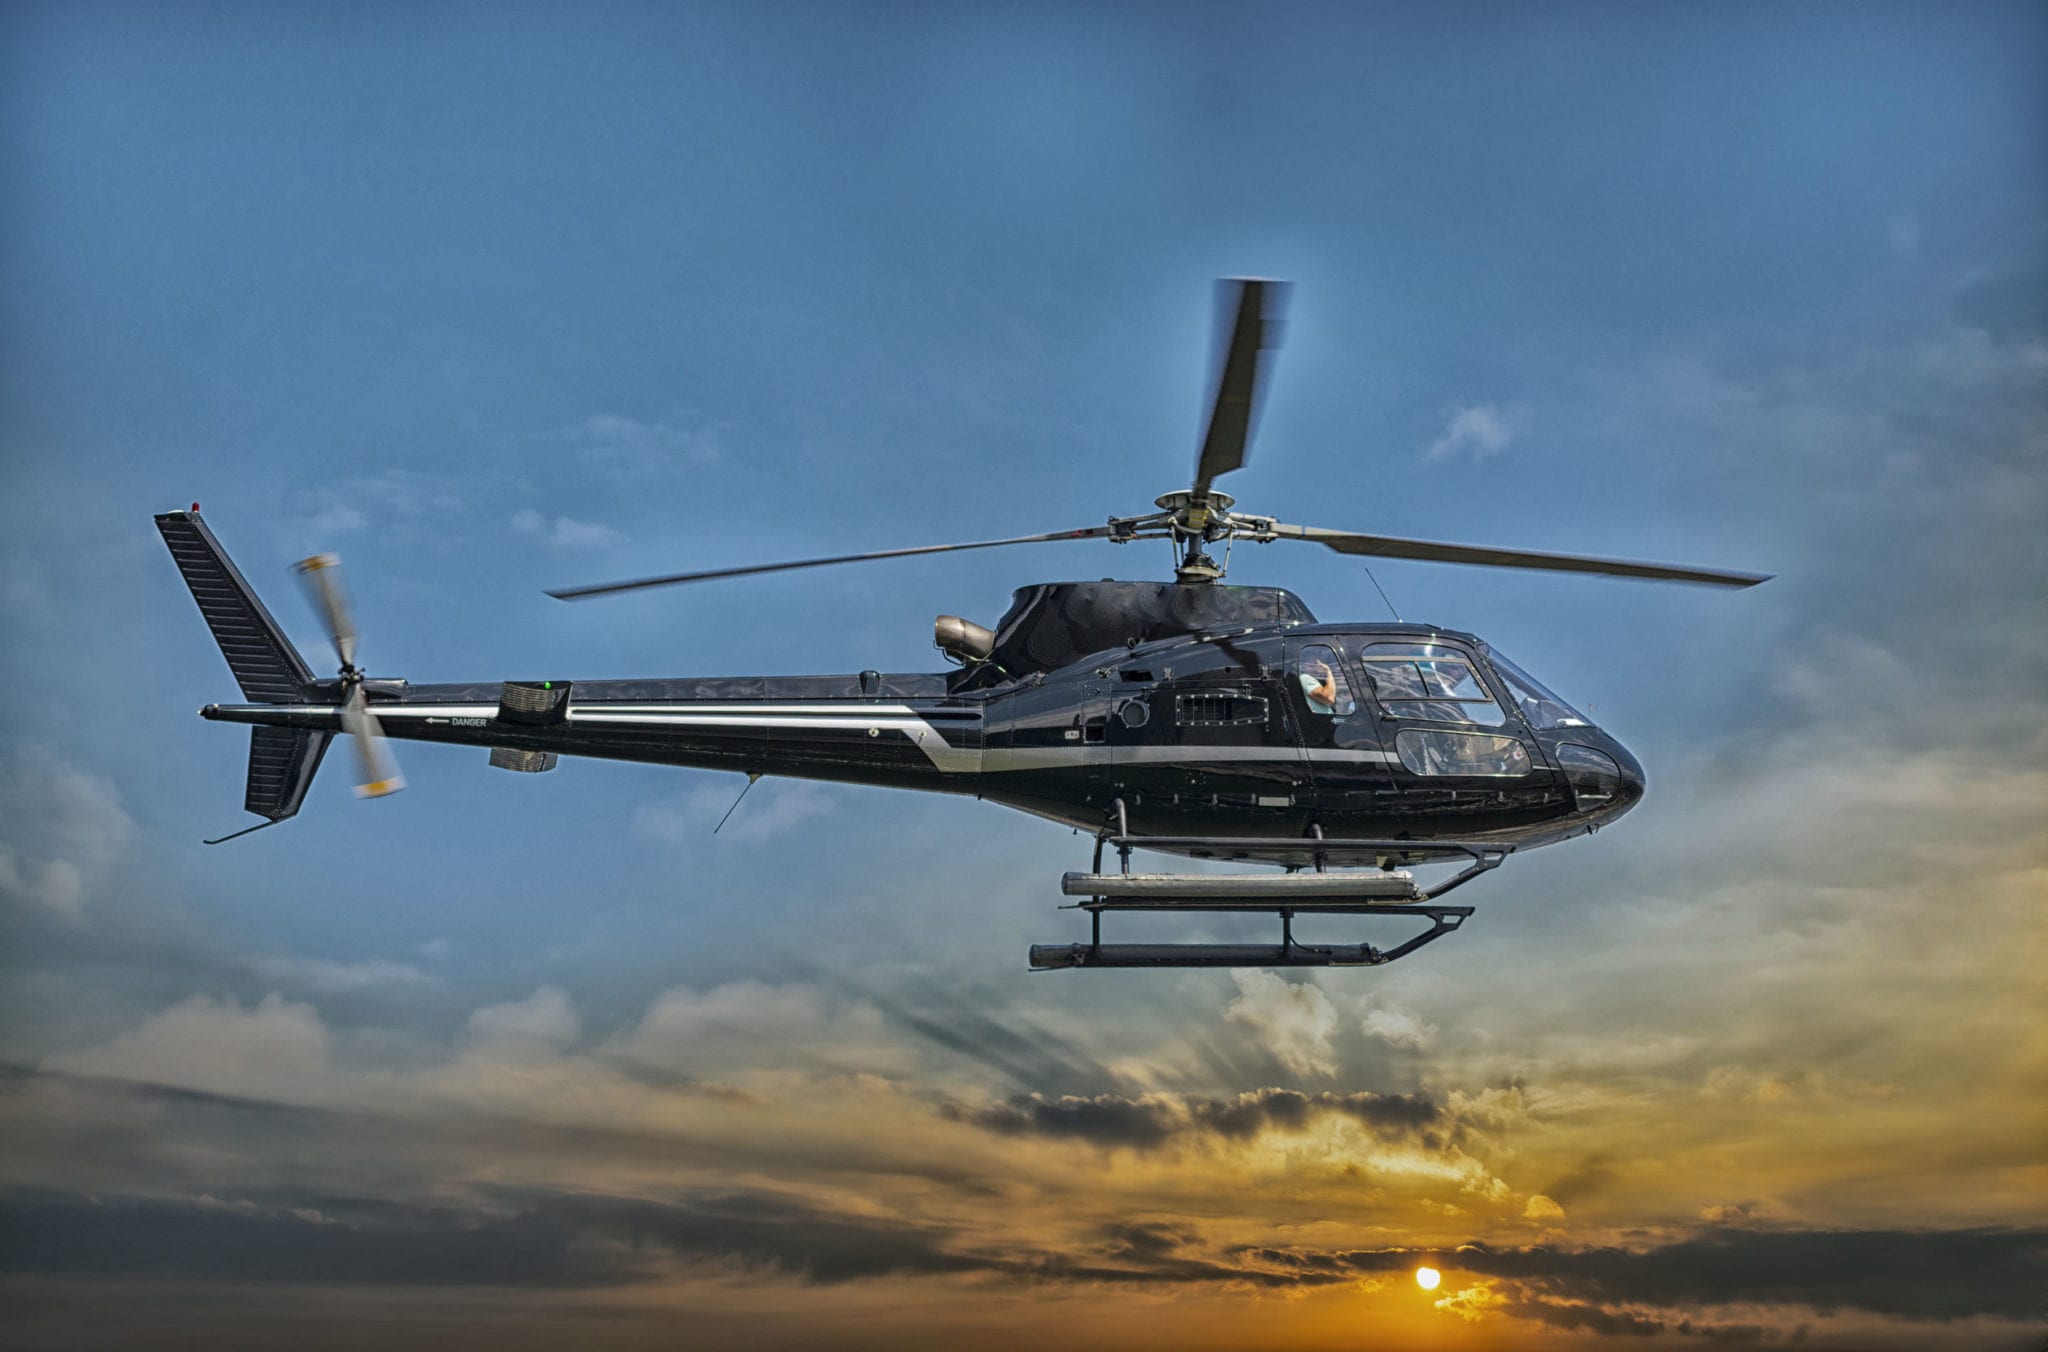 Florida Helicopter Crash Investigations – What Goes into Them?